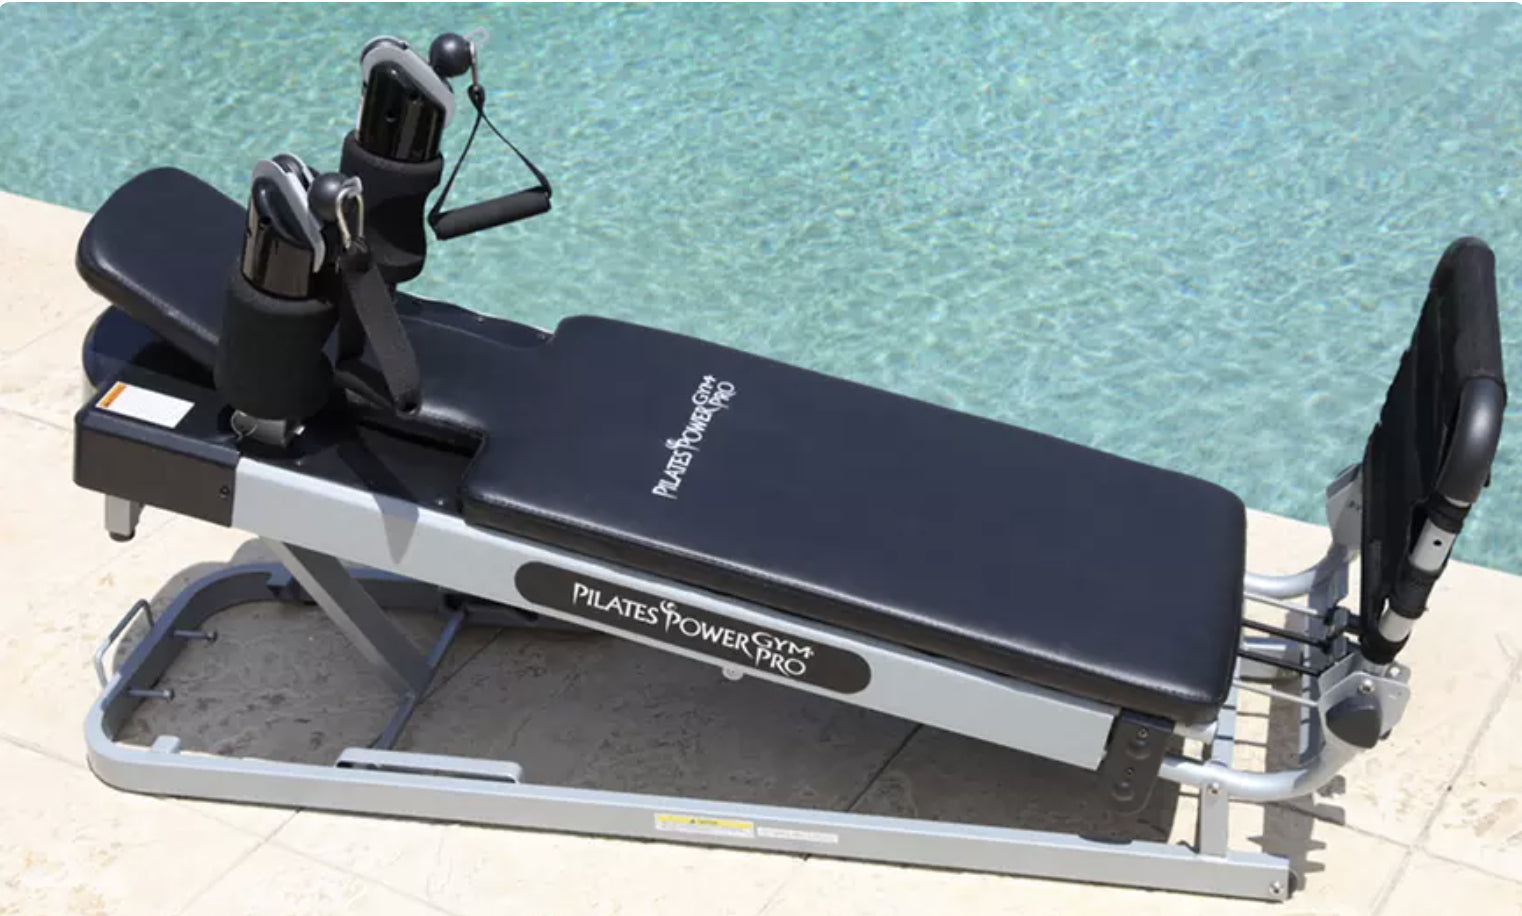 Mini Reformer Exercise System - Pilates Power Gym - Personal Hour for Yoga and Meditations 